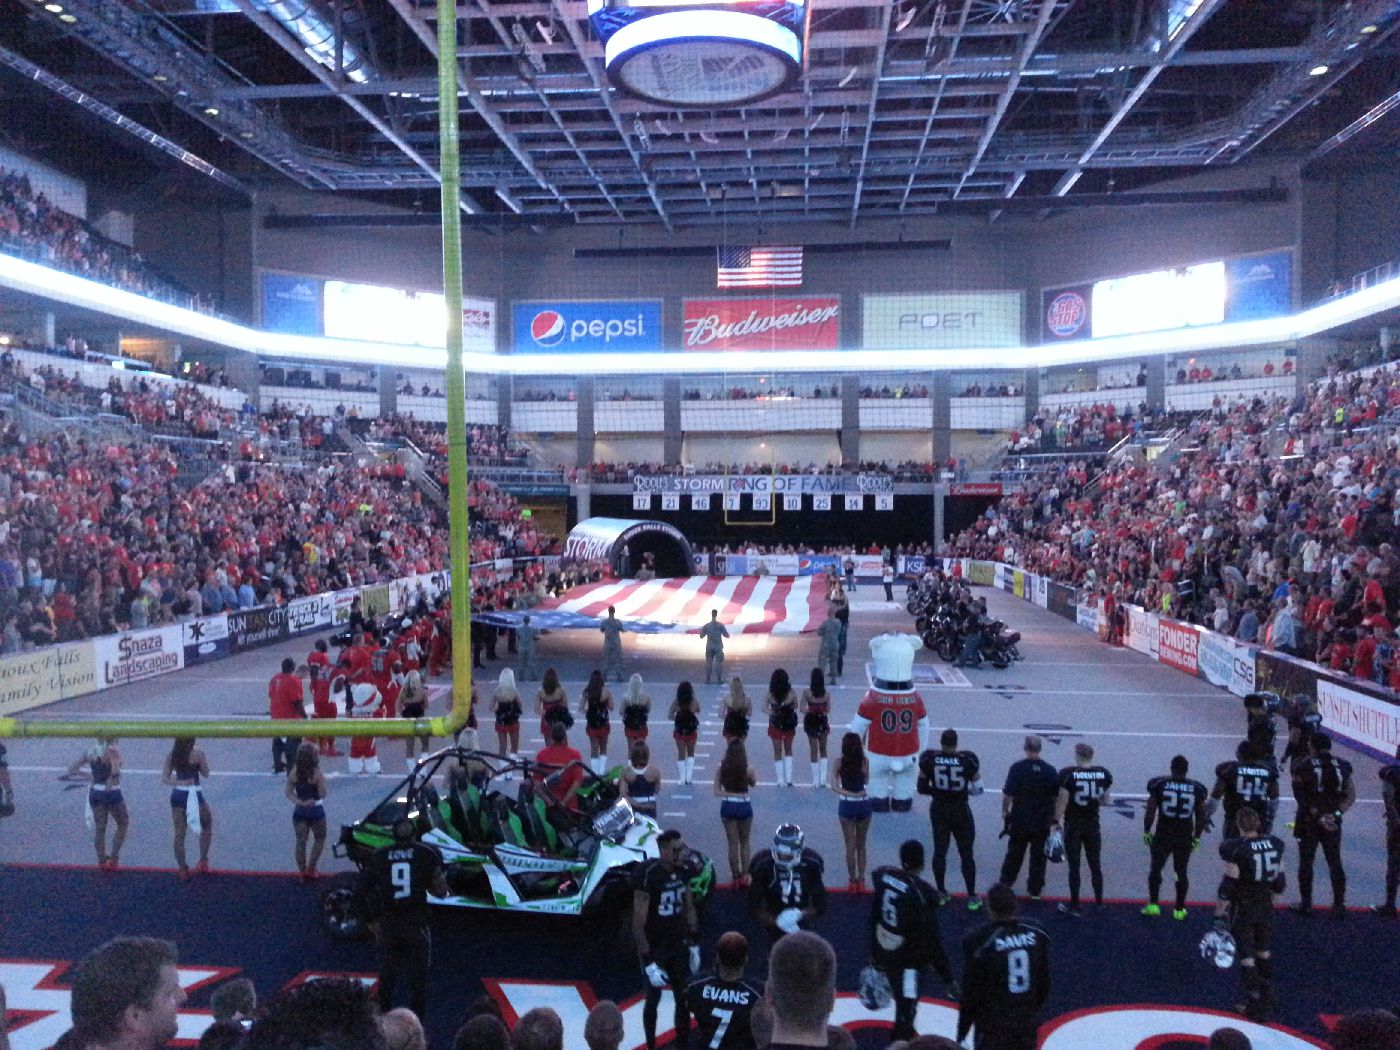 The Sioux Falls Storm hosts the 2015 United Bowl